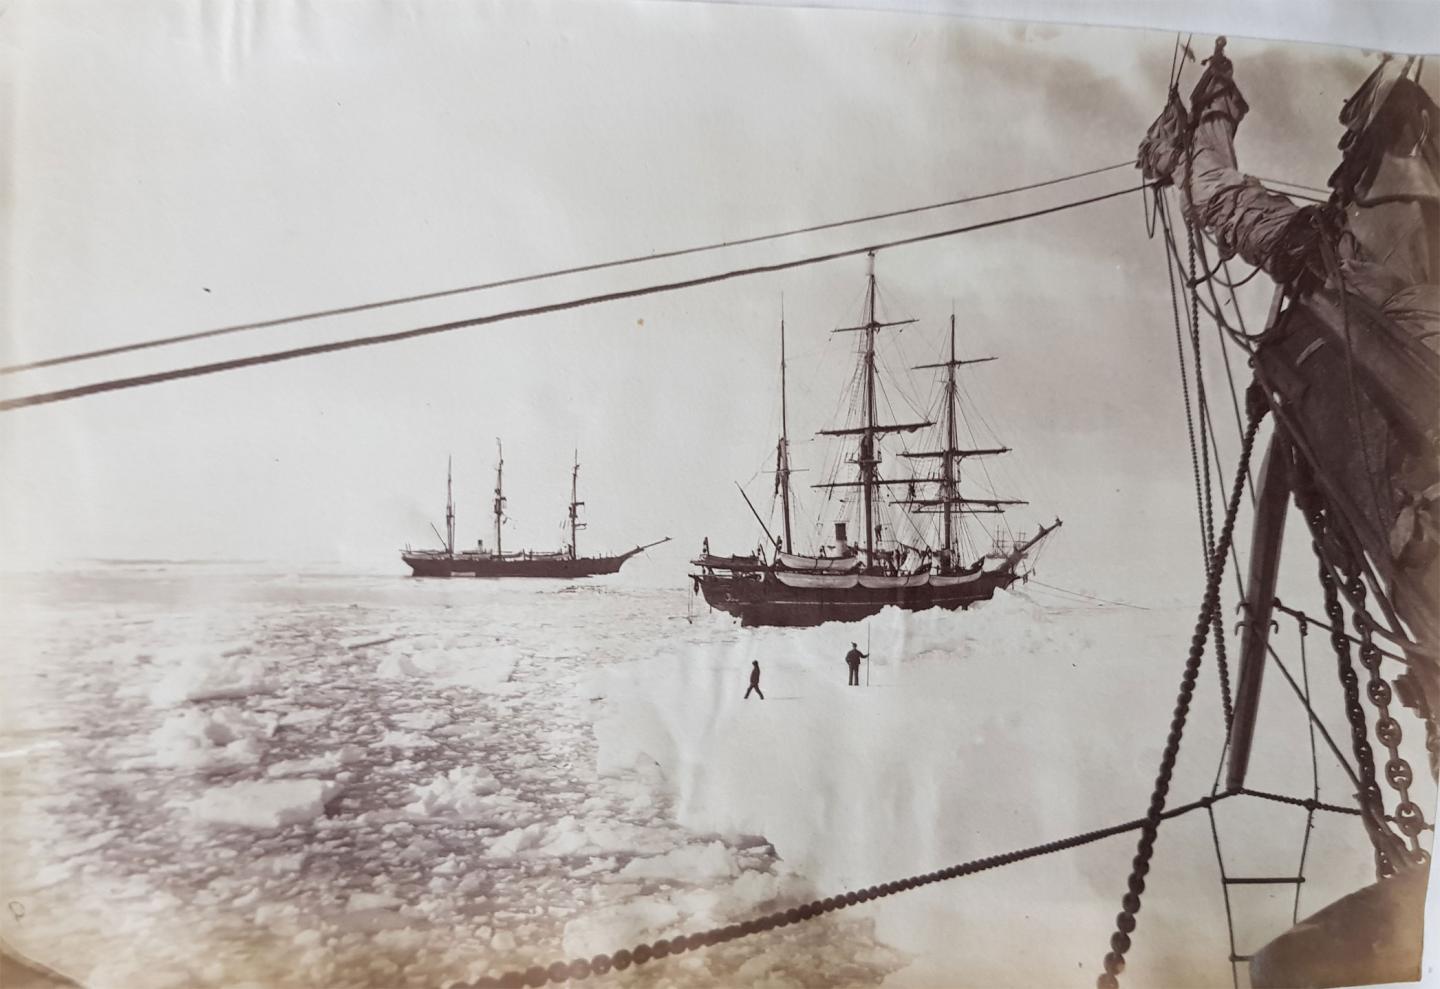 Whaling ships in the ice.